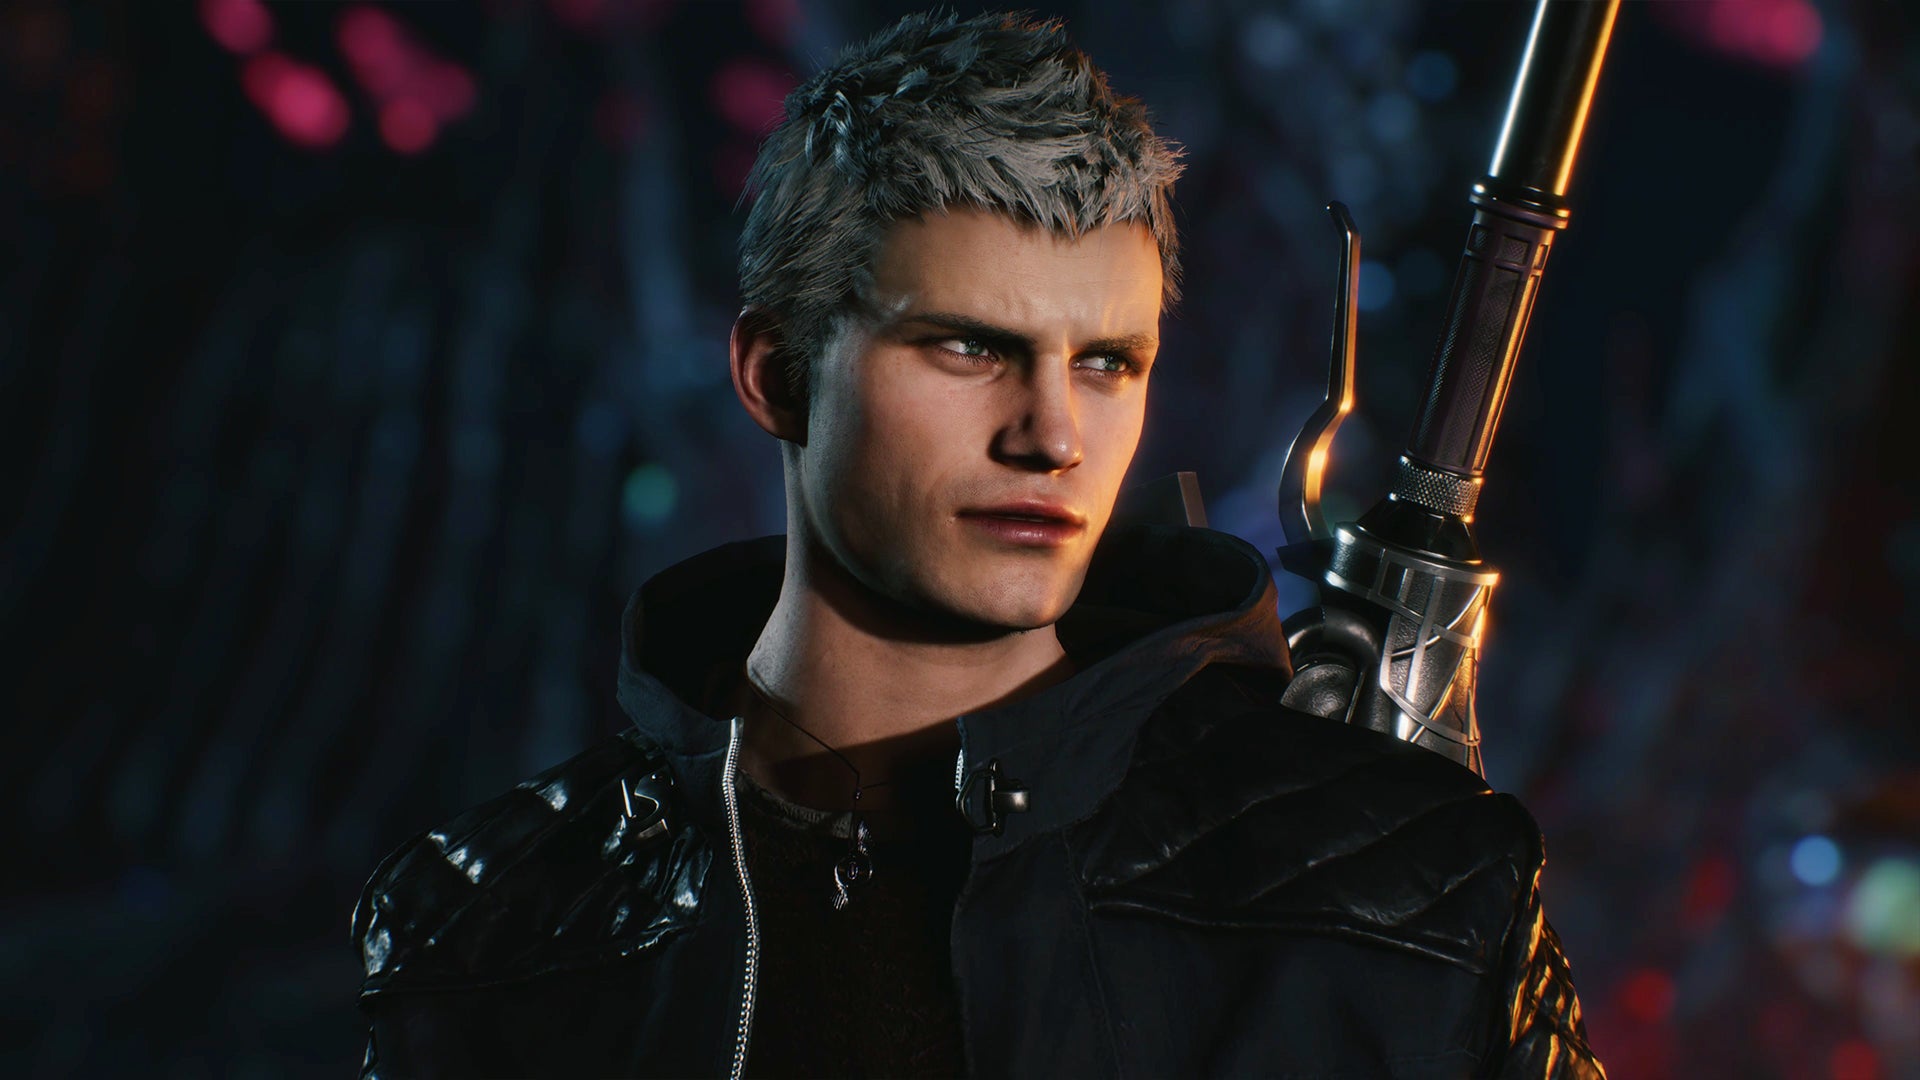 Image for Devil May Cry 5 PC Tech Analysis + Xbox One X Comparison: Everything You Need to Know!